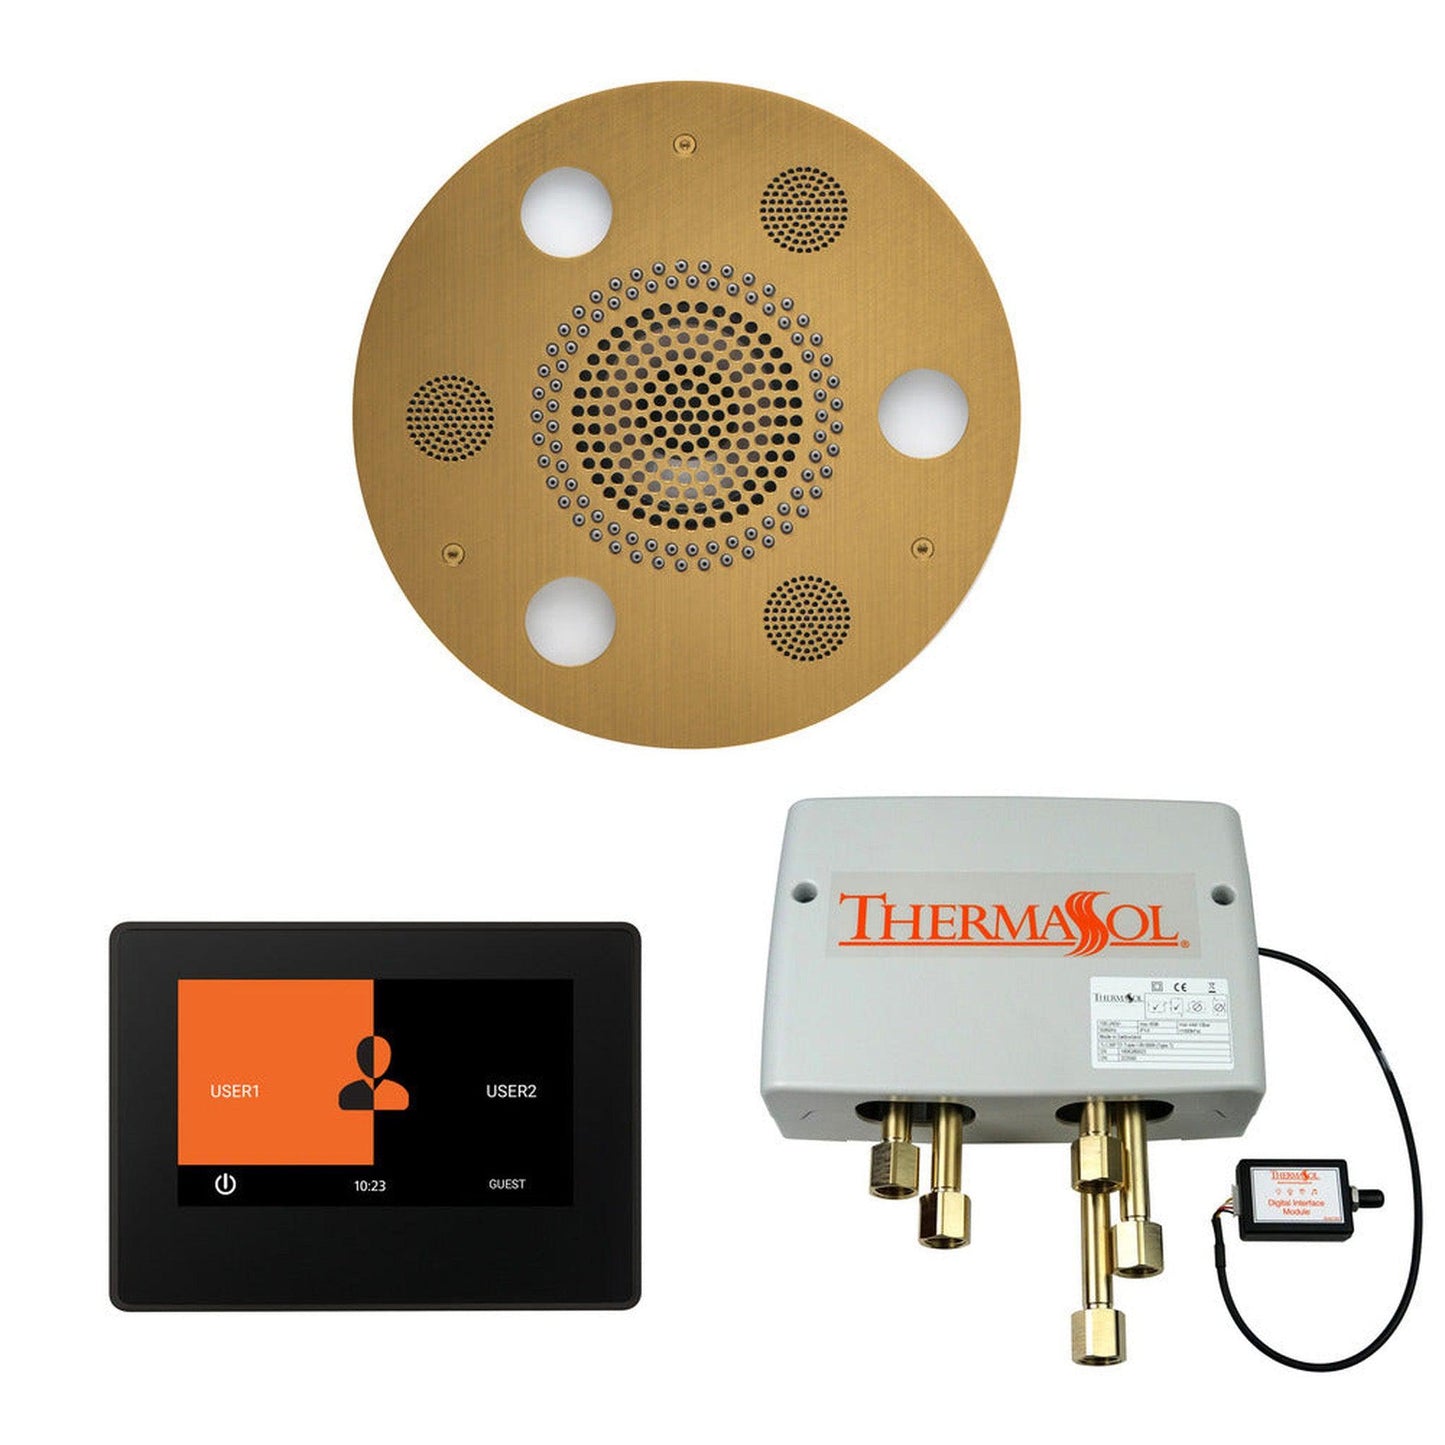 ThermaSol The Wellness Antique Brass Finish Serenity Advancedd Round Shower Package with 7" ThermaTouch